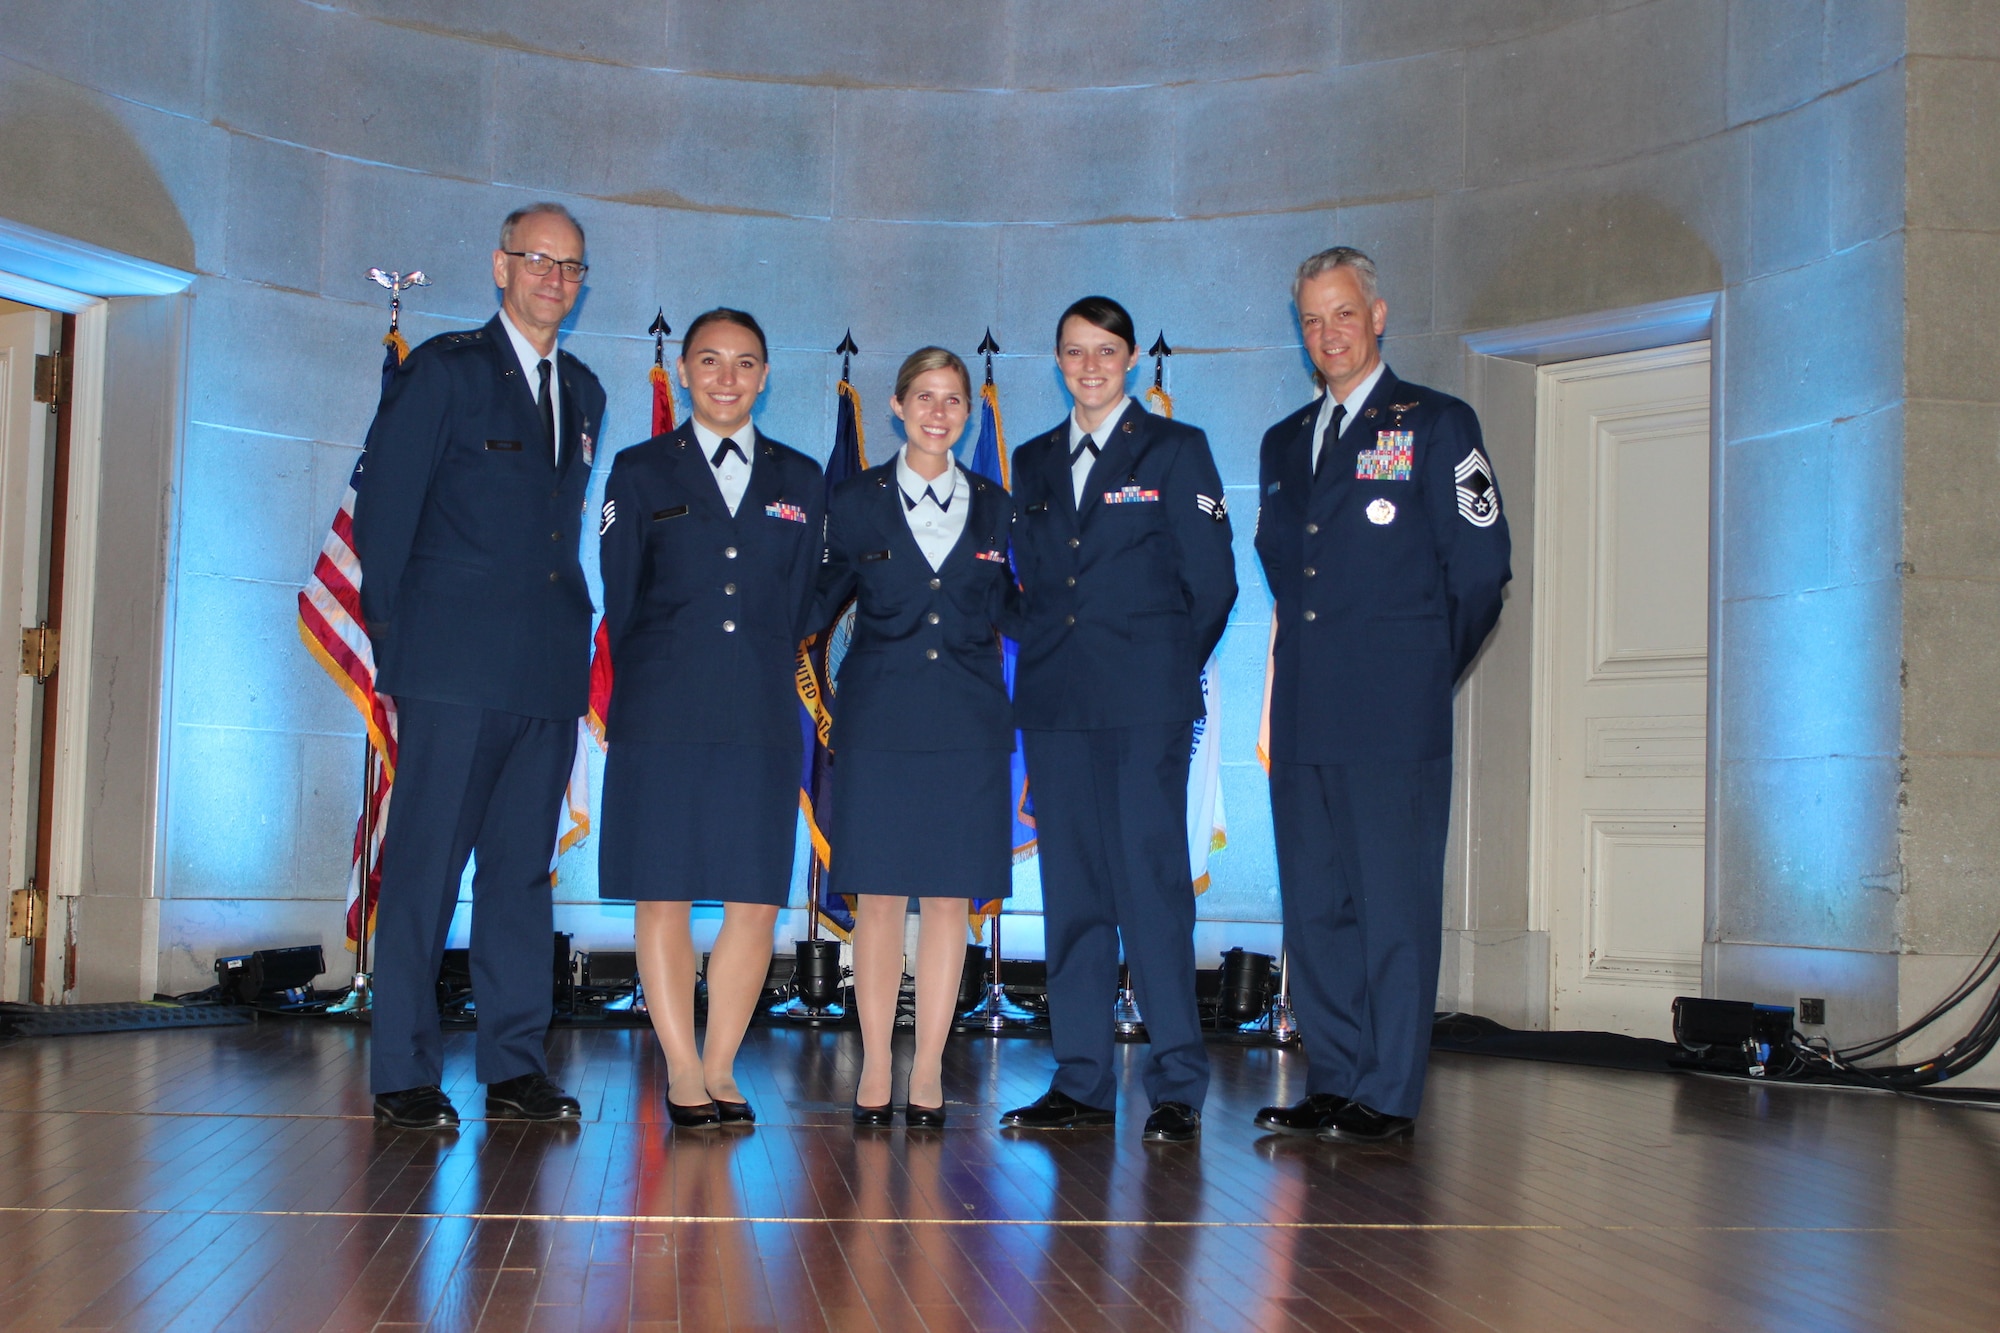 (From left) Lt. Gen. Mark Ediger, U.S. Air Force Surgeon General, Staff Sgt. Alyson Venegas, Senior Airman Linda Wilson, and Senior Airman Logan Bennett, 99th Medical Group Aerospace Medical Technicians, and Chief Master Sgt. George Cum, chief, Medical Enlisted Force, Office of the Air Force Surgeon General, at the 2018 Heroes of Military Medicine Awards in Washington, D.C., May 3, 2018. The three Airmen from the 99th were honored for the their response to the deadly 2017 mass shooting in Las Vegas, when they heroically risked their lives to save fellow concert attendees. (U.S. Air Force photo by Karina Luis)